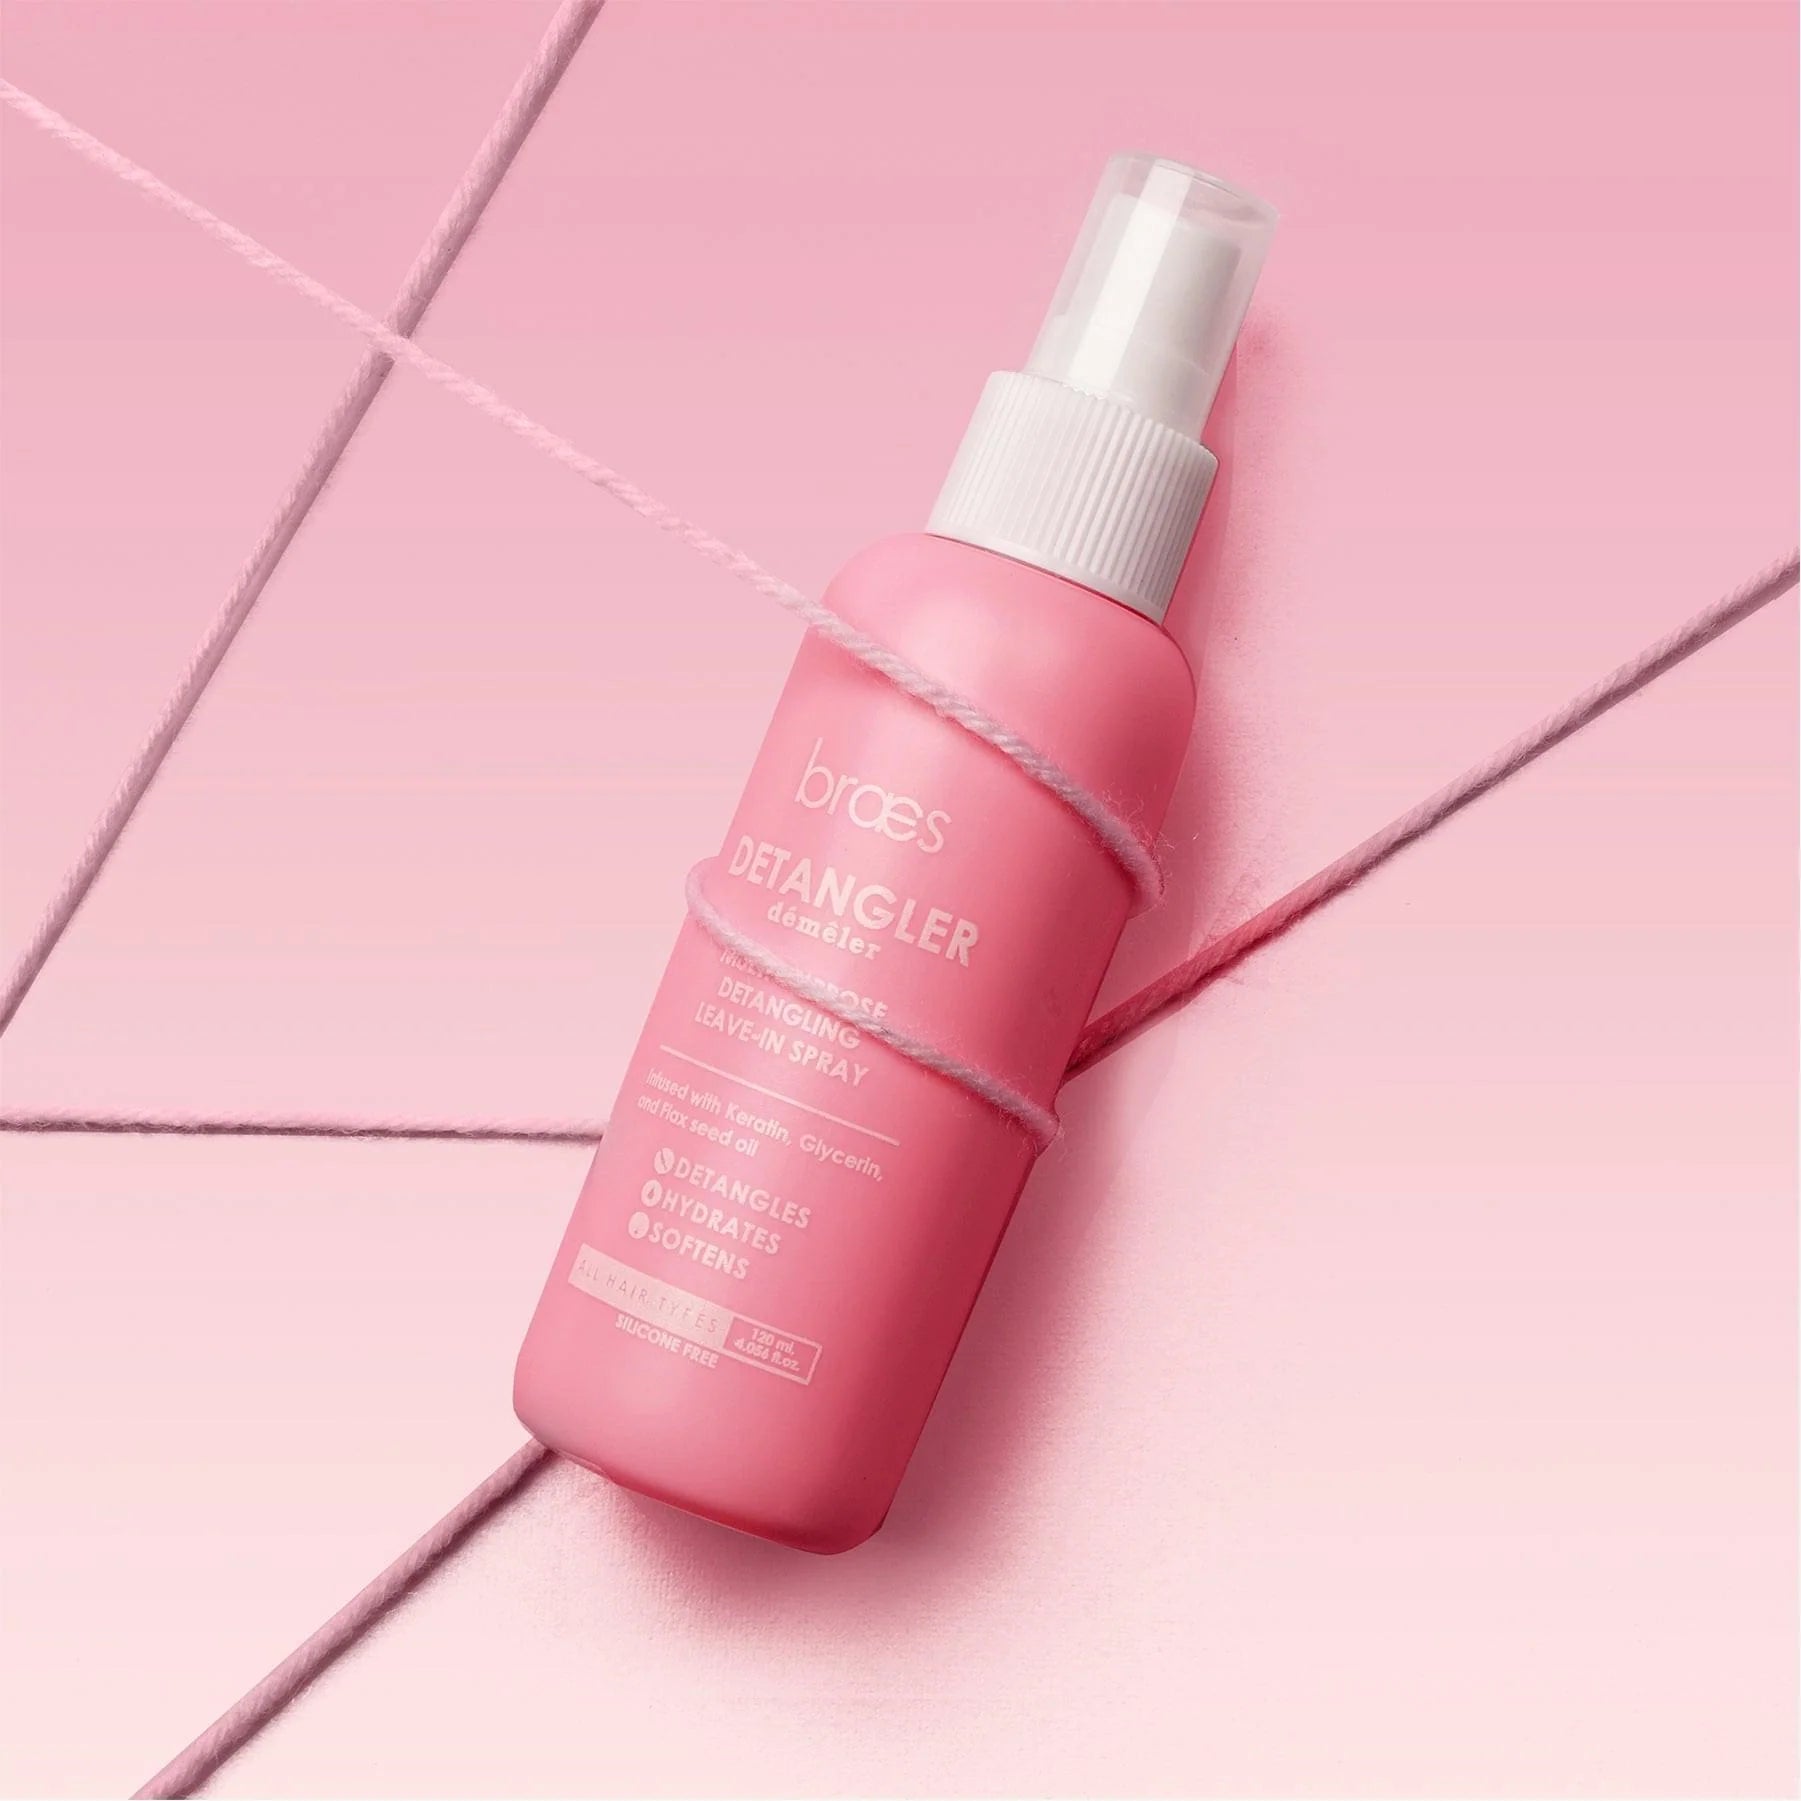 Shop the Braes Detangling Leave-in Spray on ZYNAH